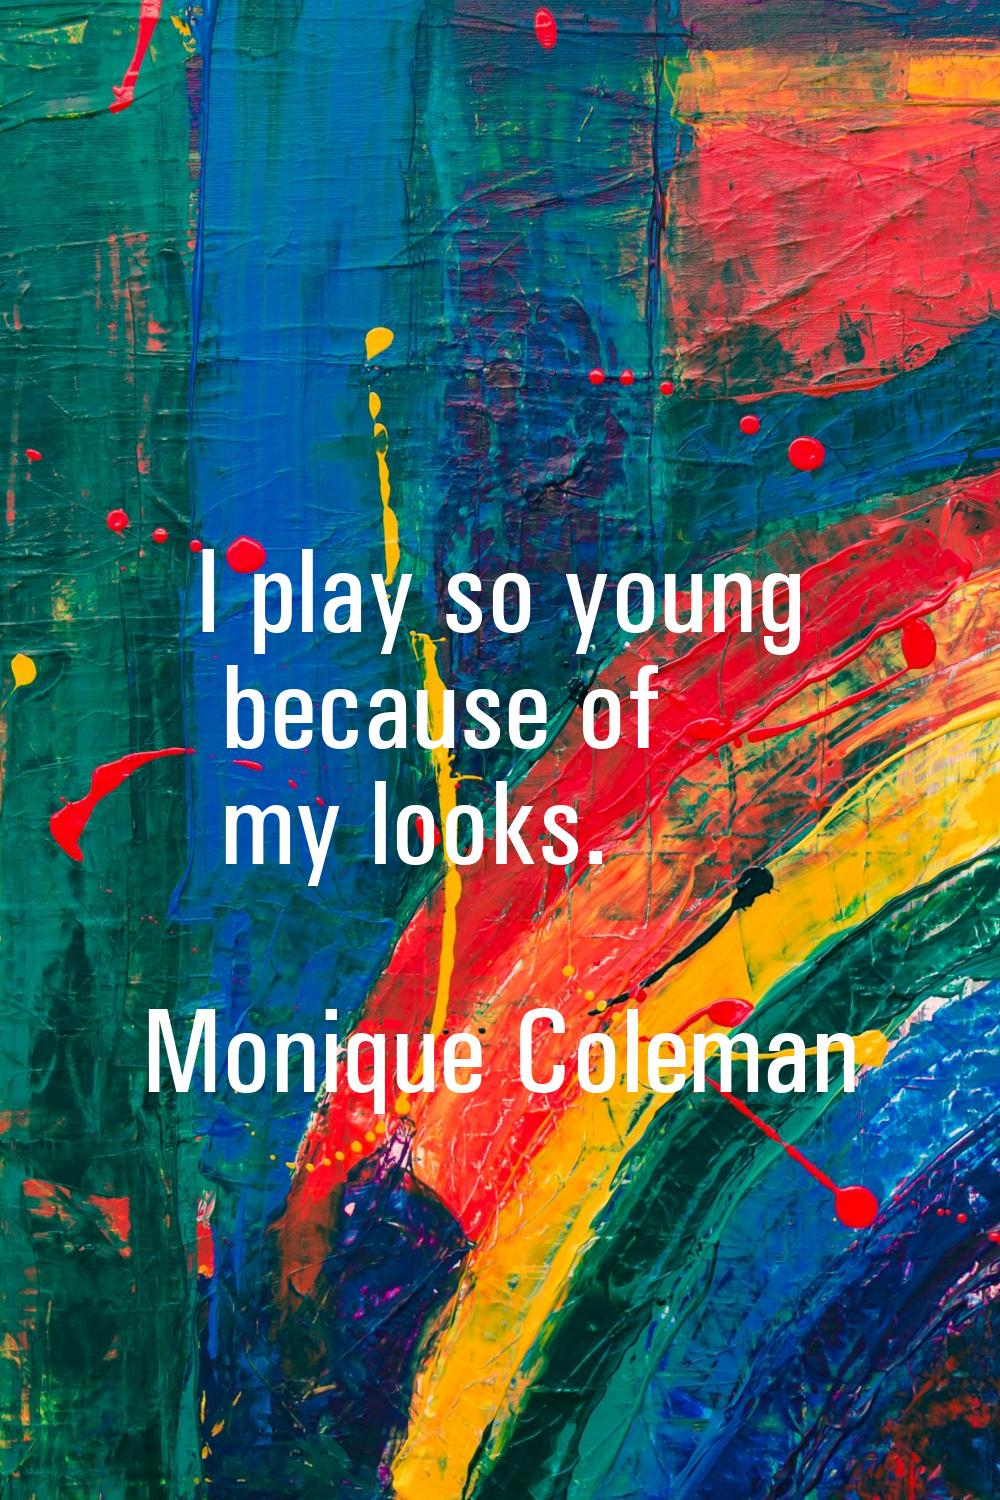 I play so young because of my looks.